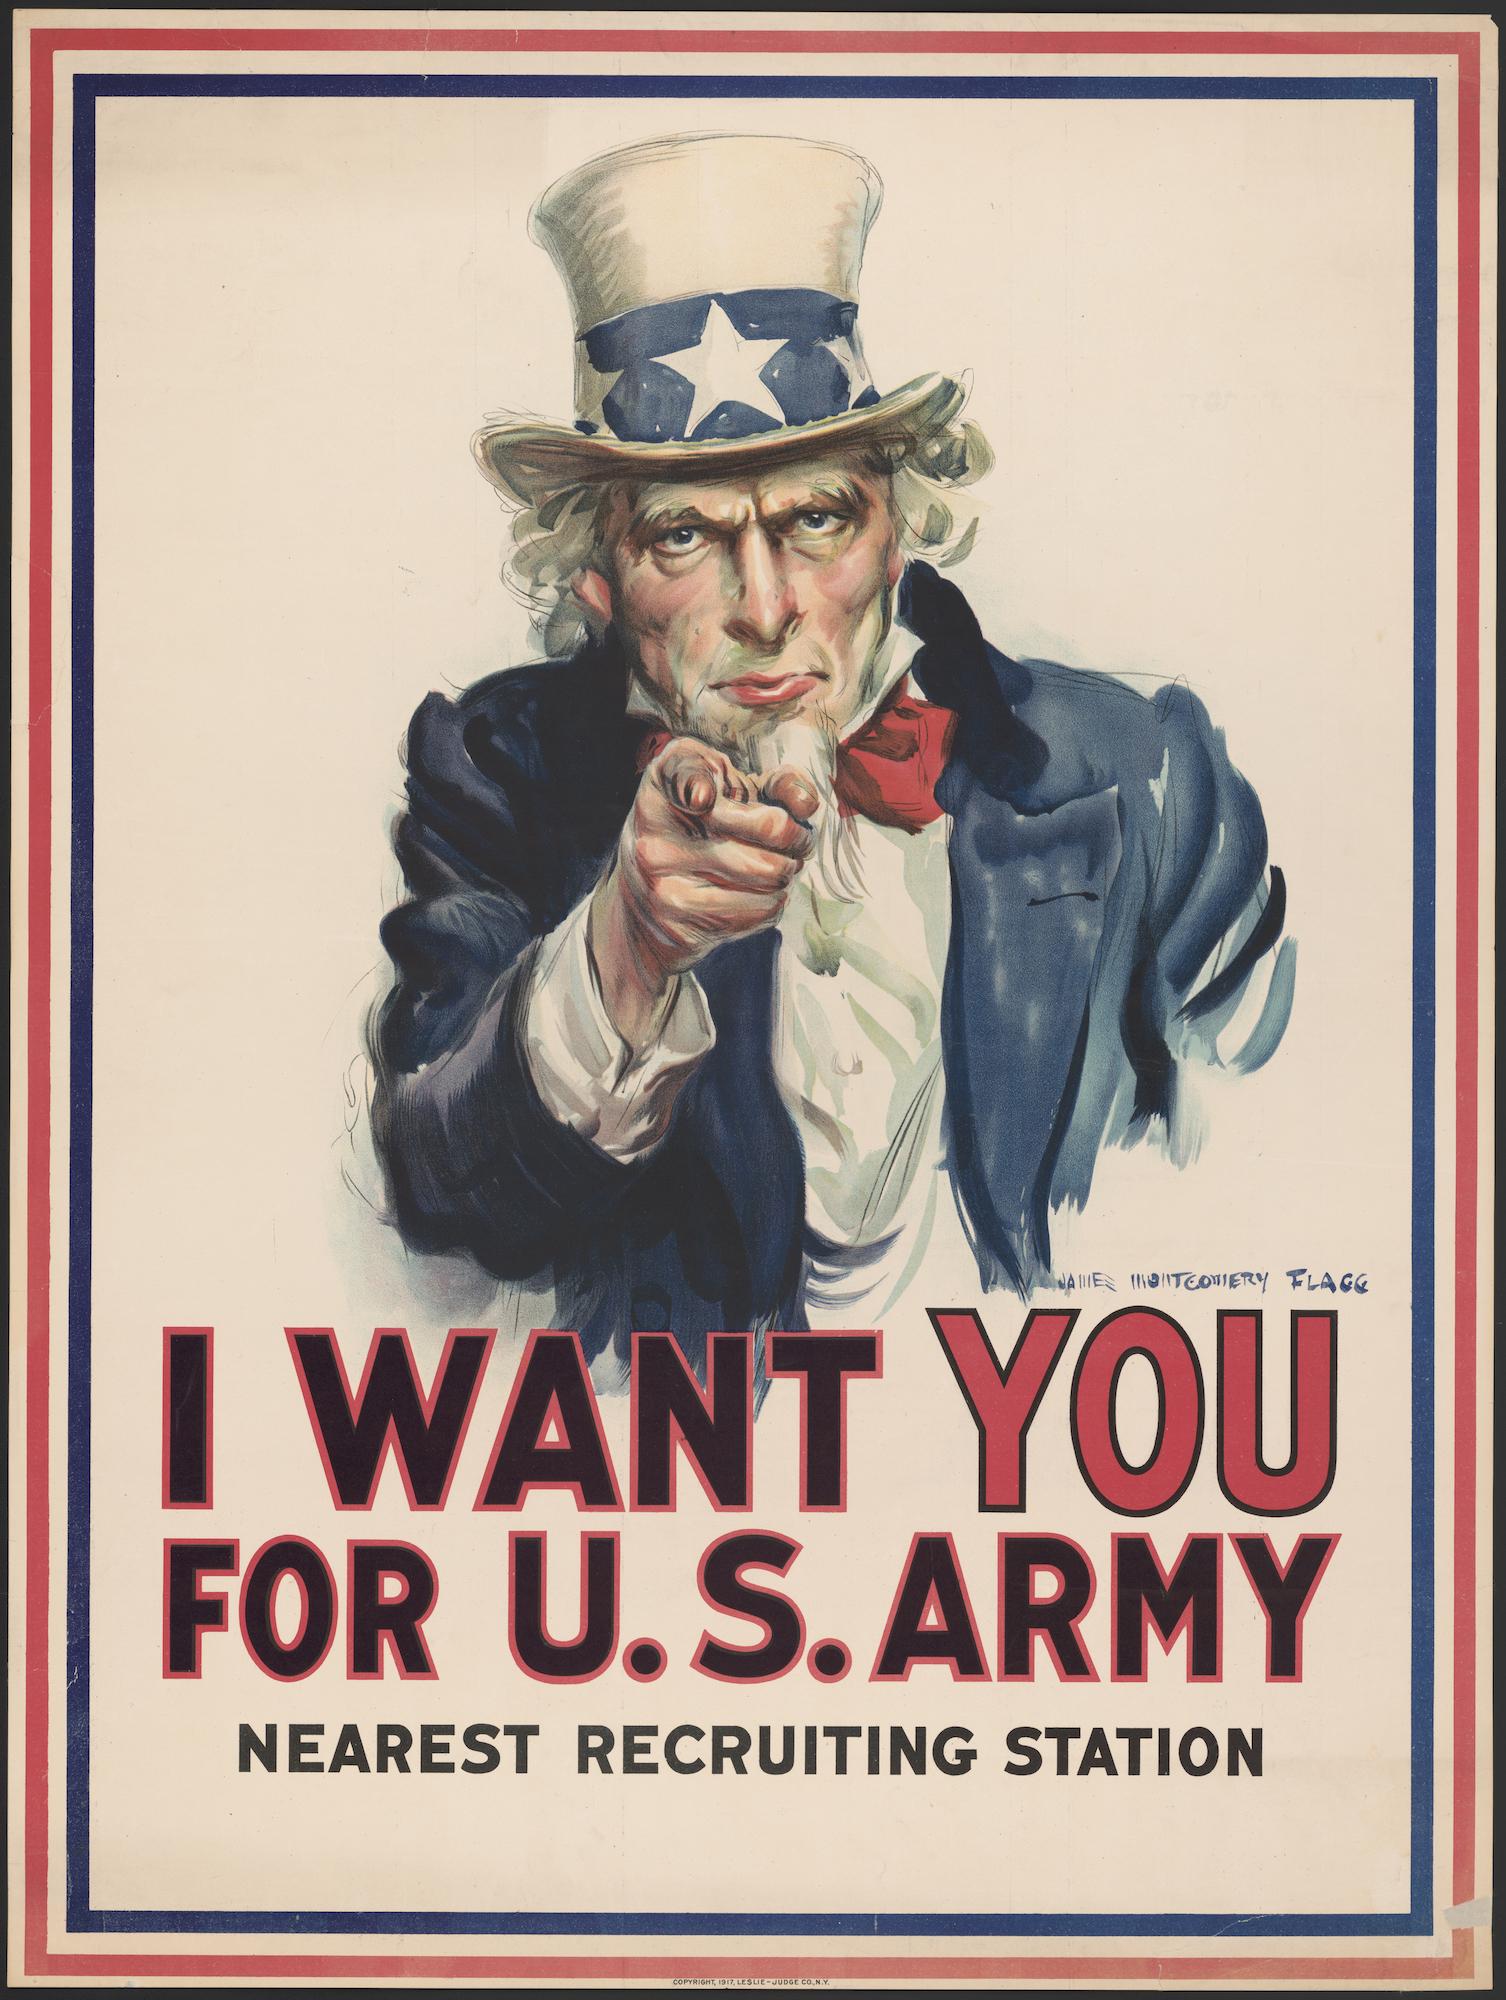 I want you for U.S. Army Rights Alliance